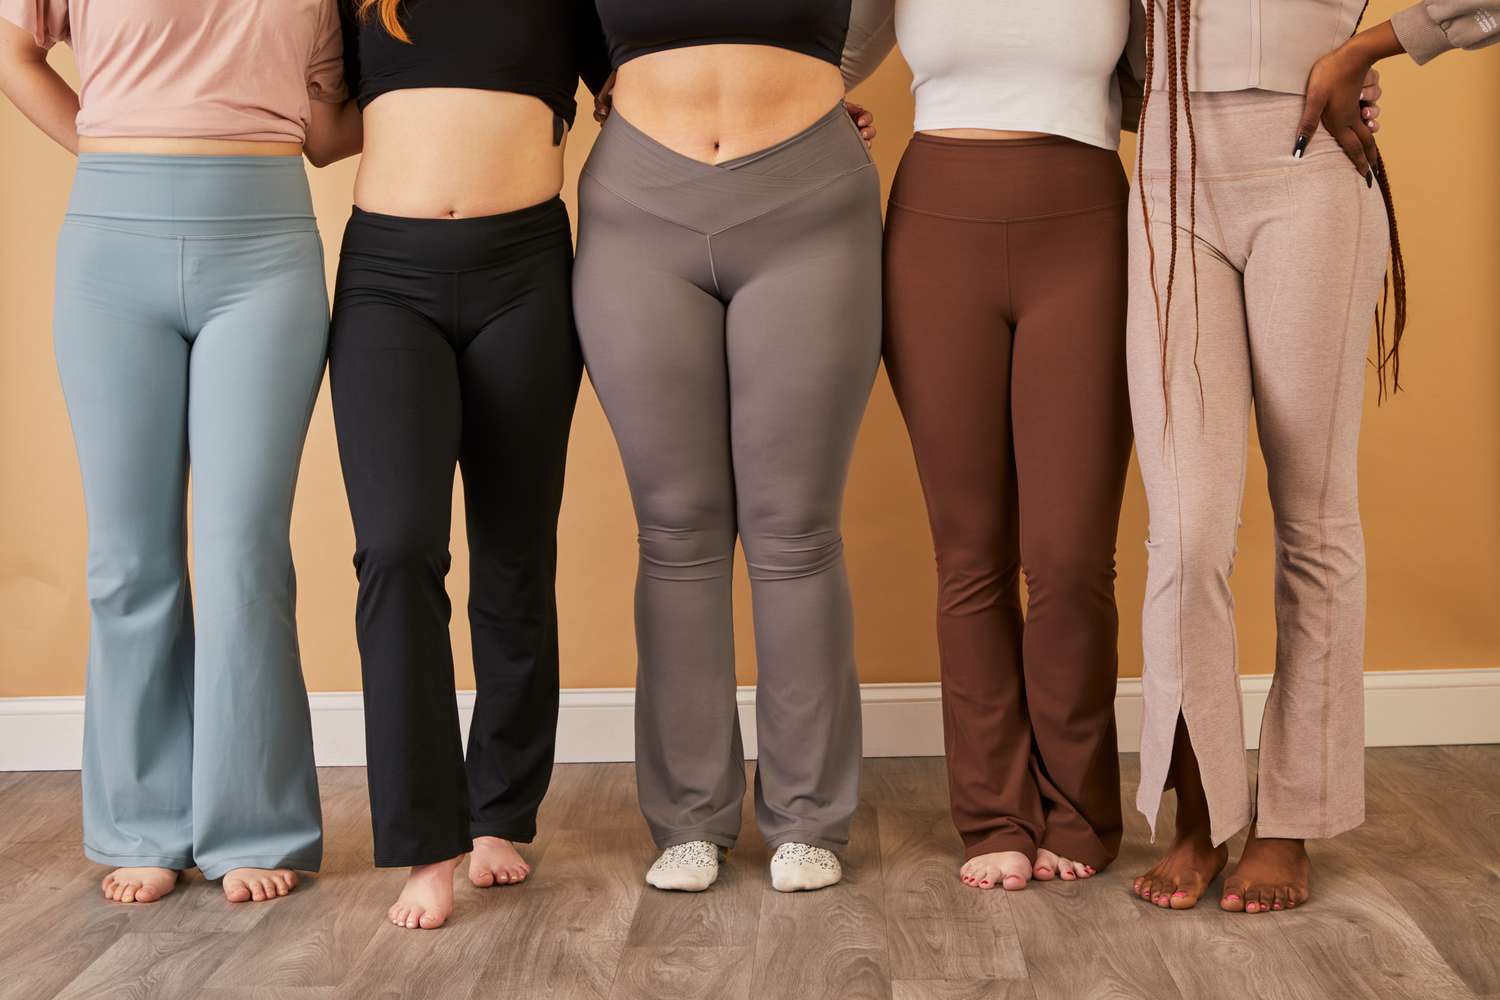 ashley highhouse recommends sexy moms in yoga pants pic